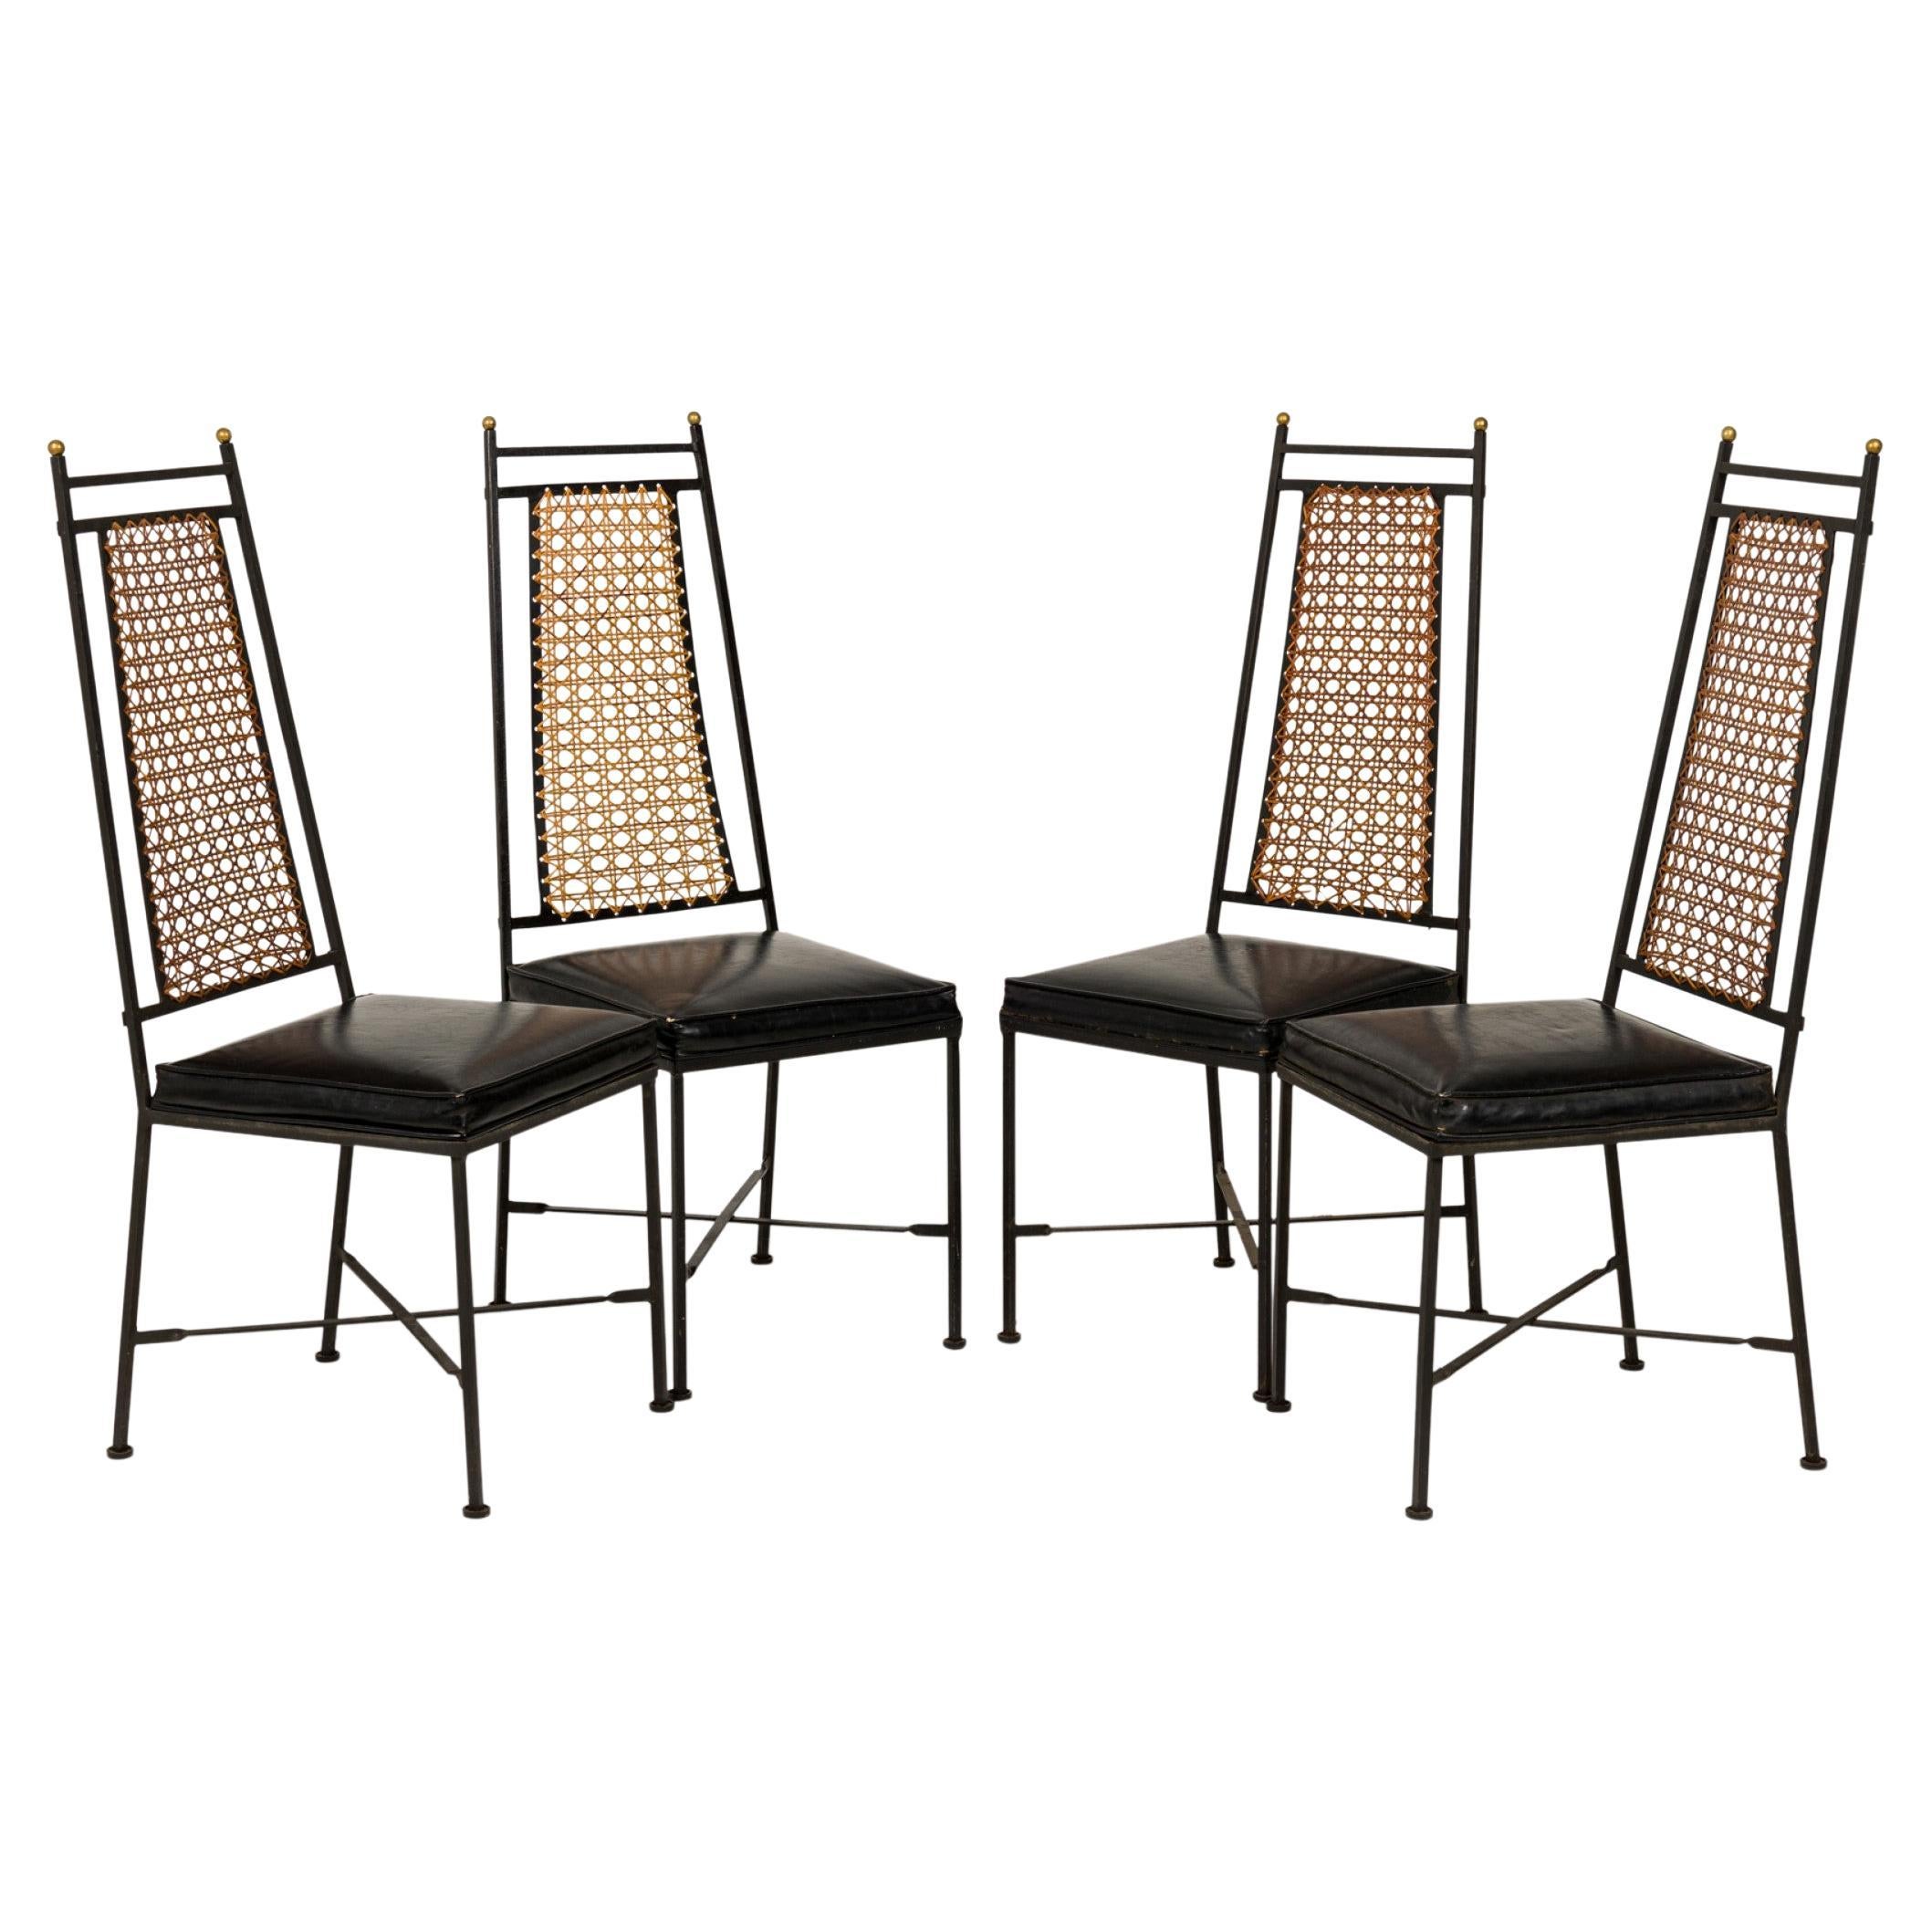 Set of 6 American Mid-Century Tapered Back Wrought Iron Caned Seat Dining / Side For Sale